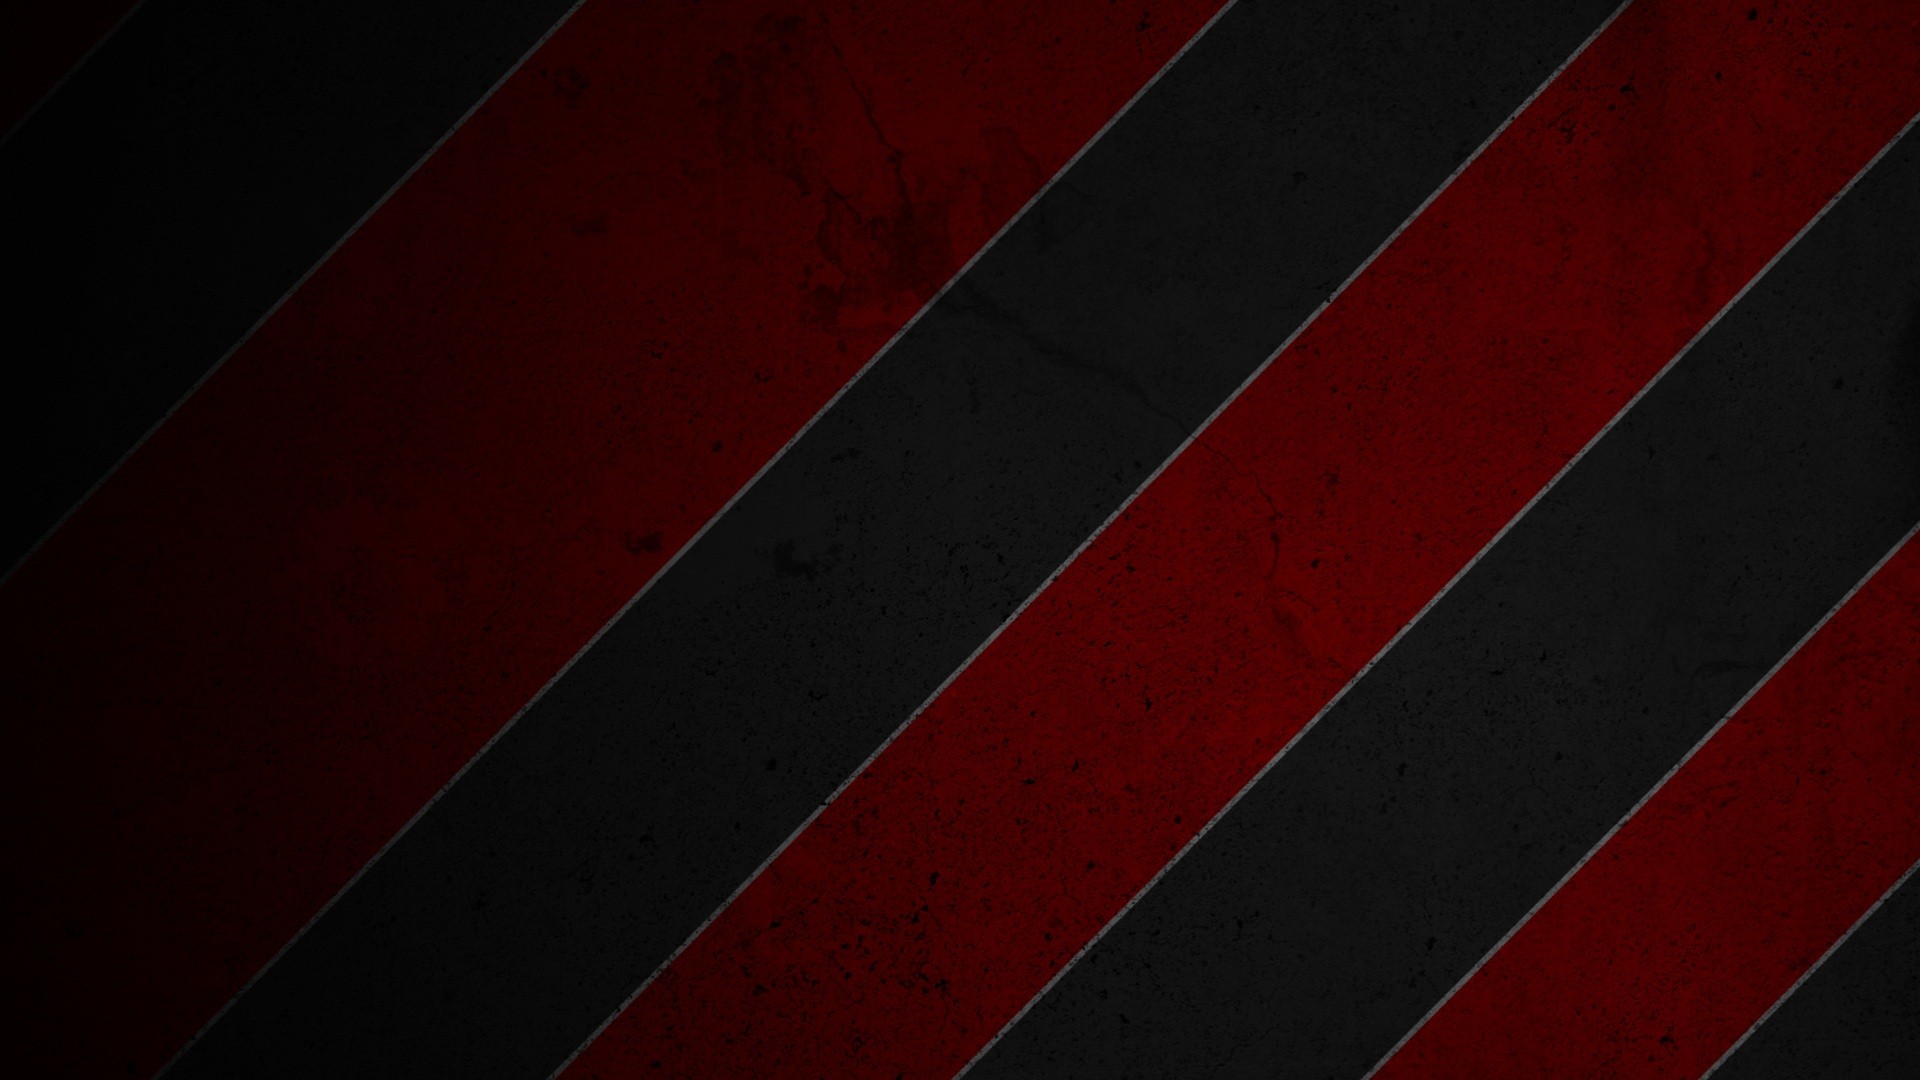 Black And Red Wallpaper Hd - Red And Black Wallpapers HD - Wallpaper